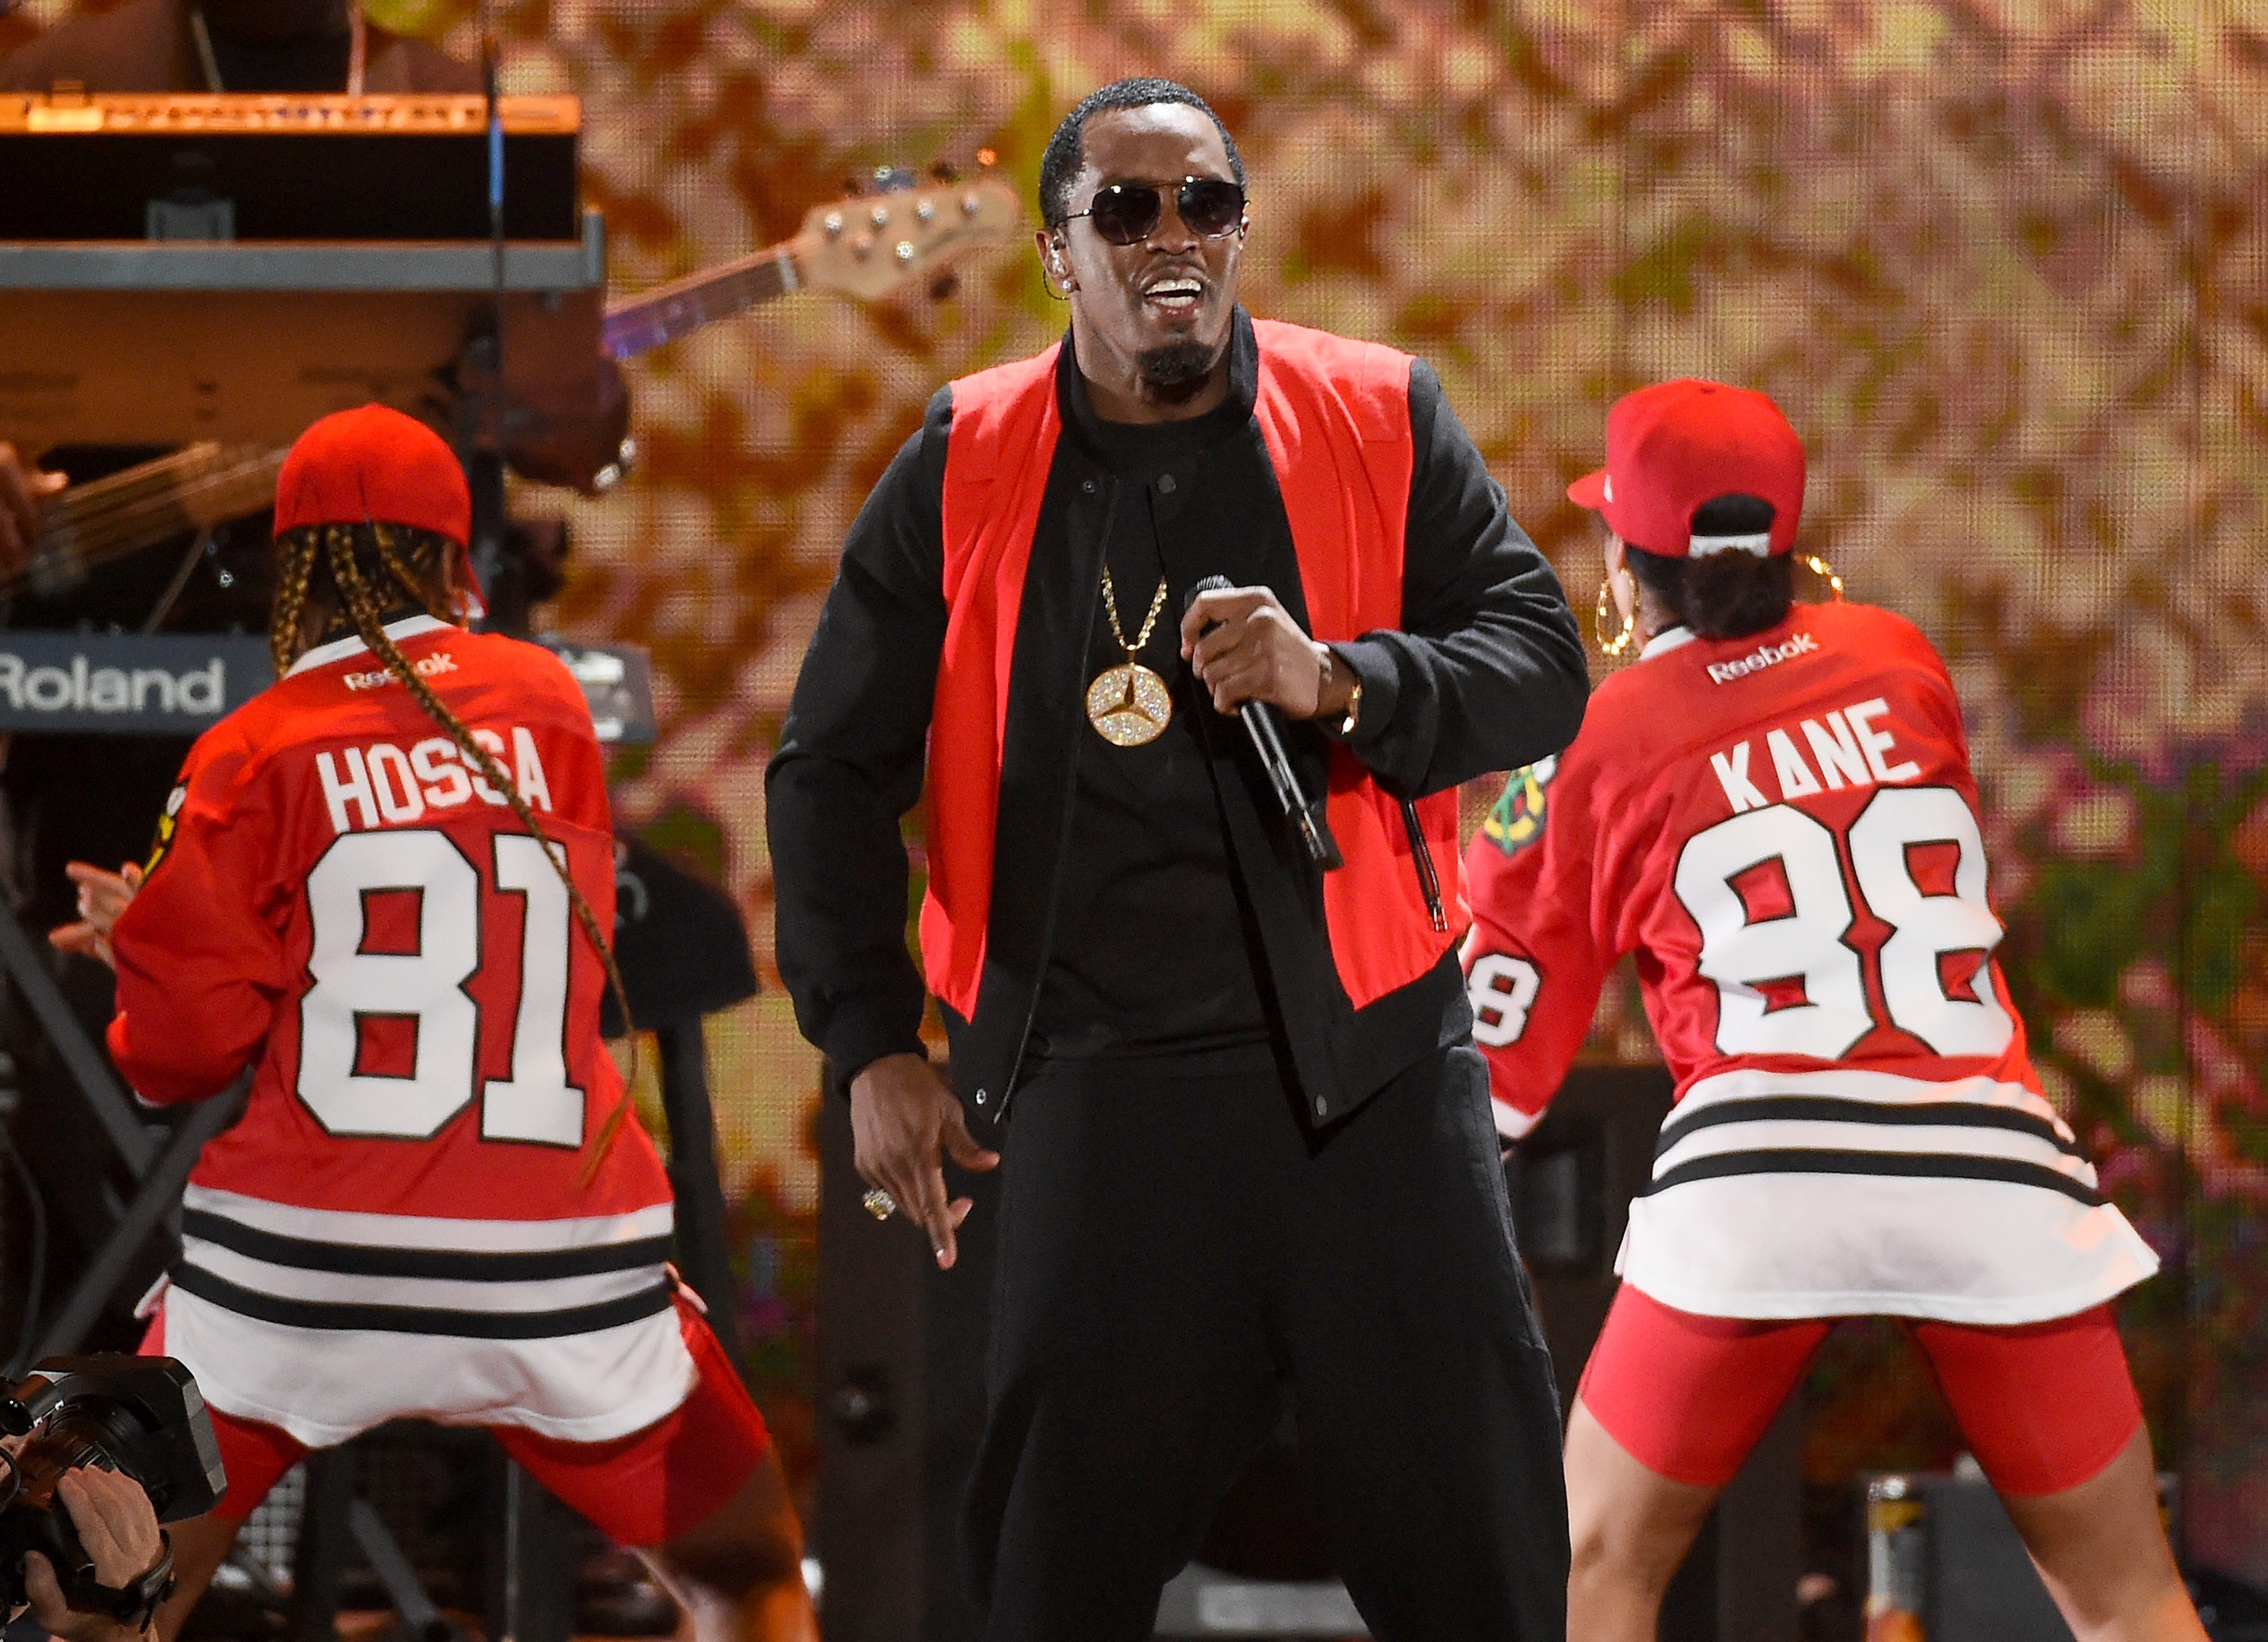 Recording artist Sean "Diddy" Combs performs with dancers.